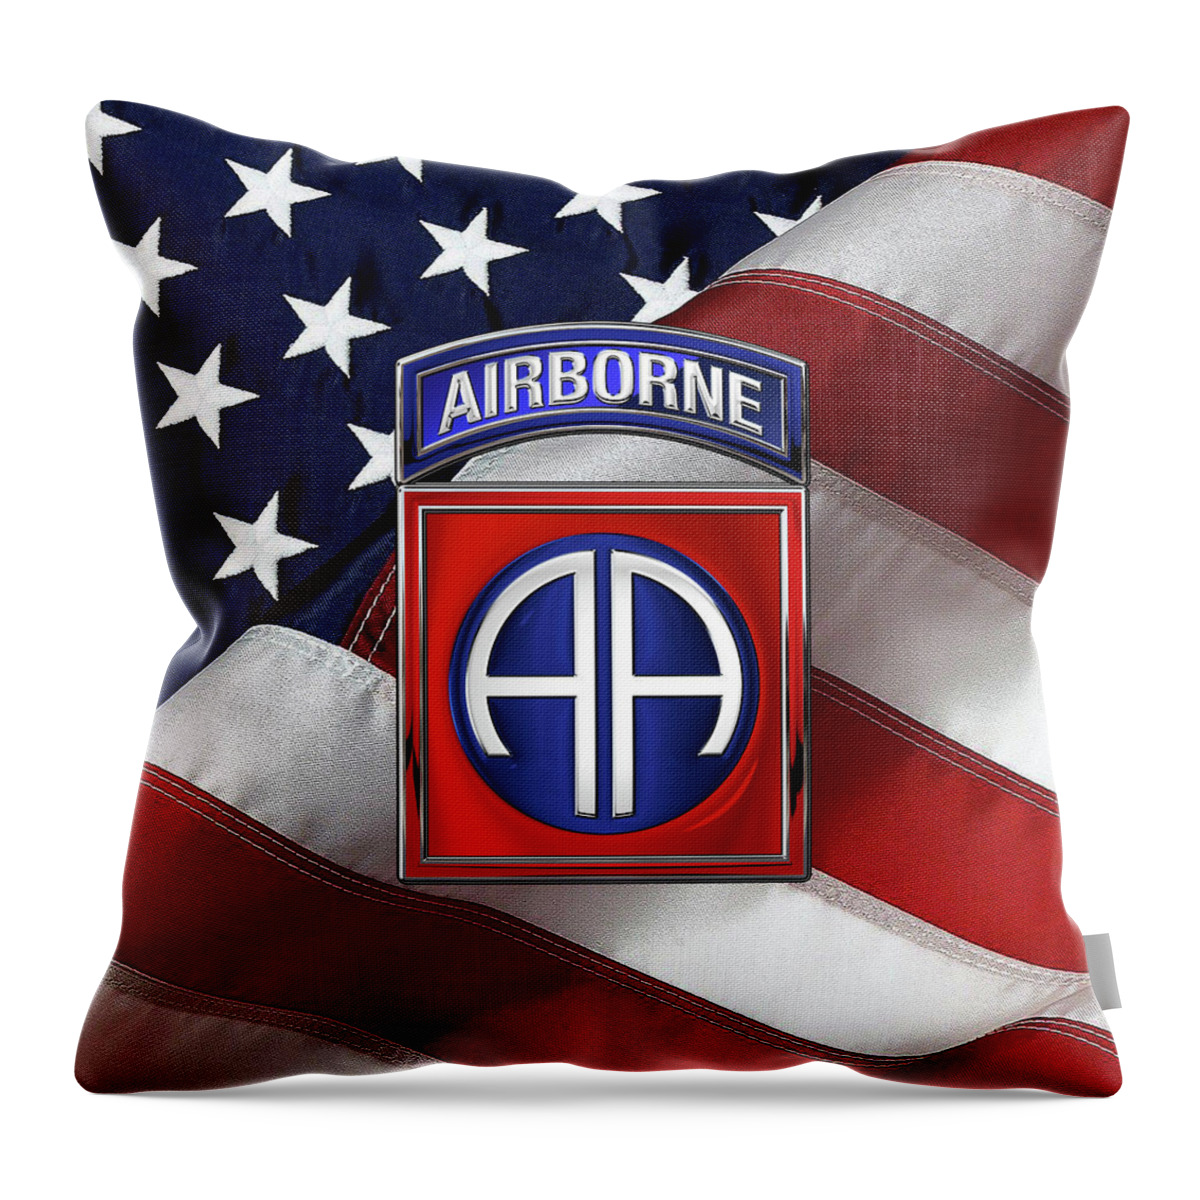 Military Insignia & Heraldry By Serge Averbukh Throw Pillow featuring the digital art 82nd Airborne Division - 82 A B N Insignia over American Flag by Serge Averbukh